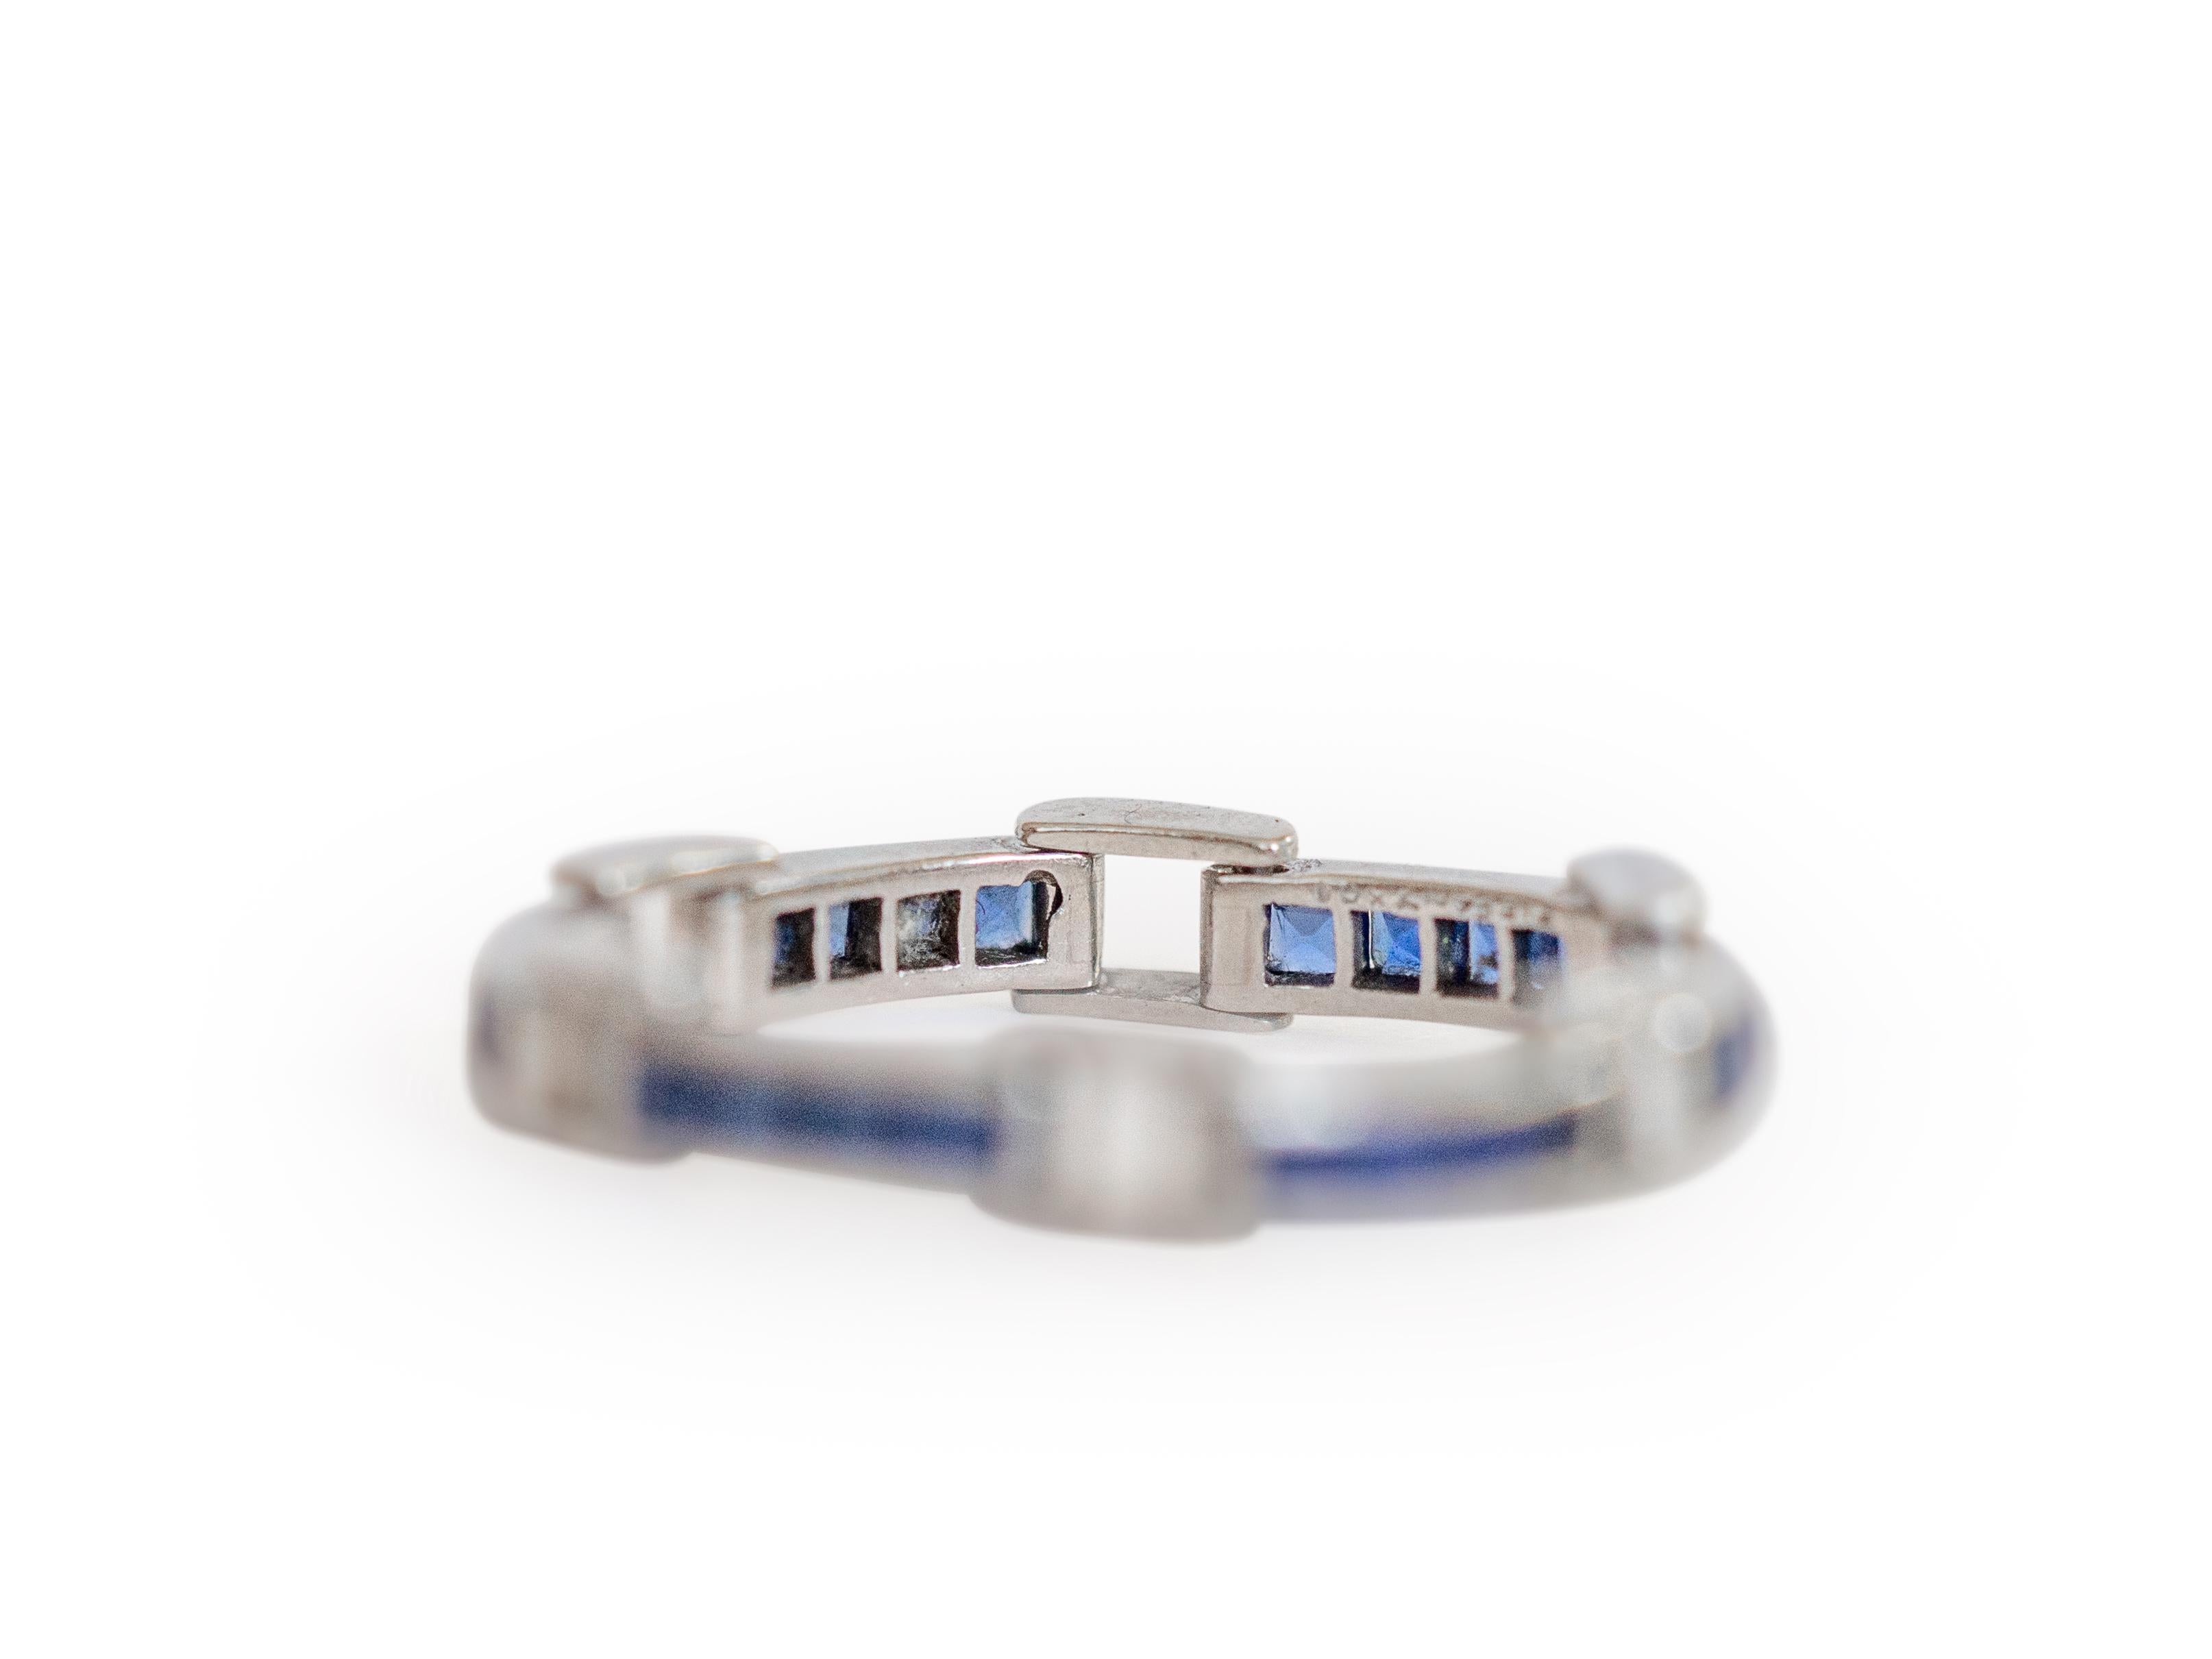 Ring Size: 6.5
Metal Type: Platinum  [Hallmarked, and Tested]
Weight:  4 grams


Sapphire Details:
Weight: .90 carat, total weight
Cut: Square Step Cut
Color: Blue
Clarity: VS

Finger to Top of Stone Measurement: 2mm
Condition:  Excellent